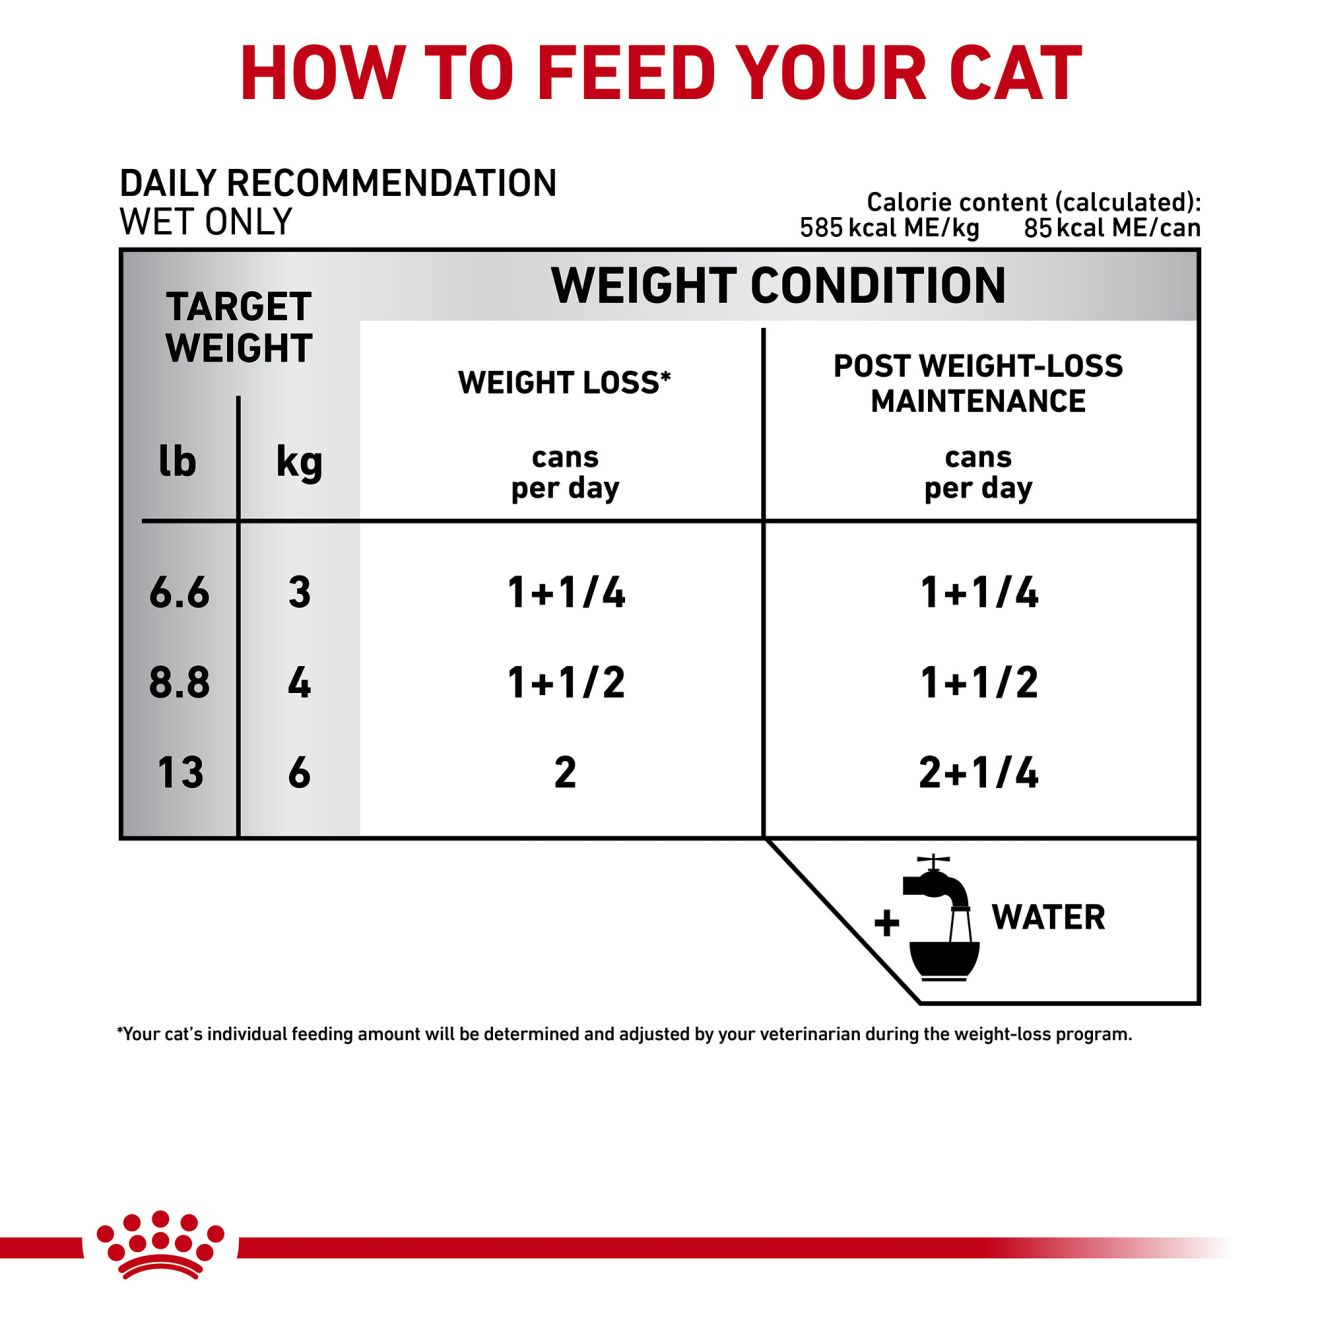 Royal Canin Veterinary Satiety Weight Management pour chat